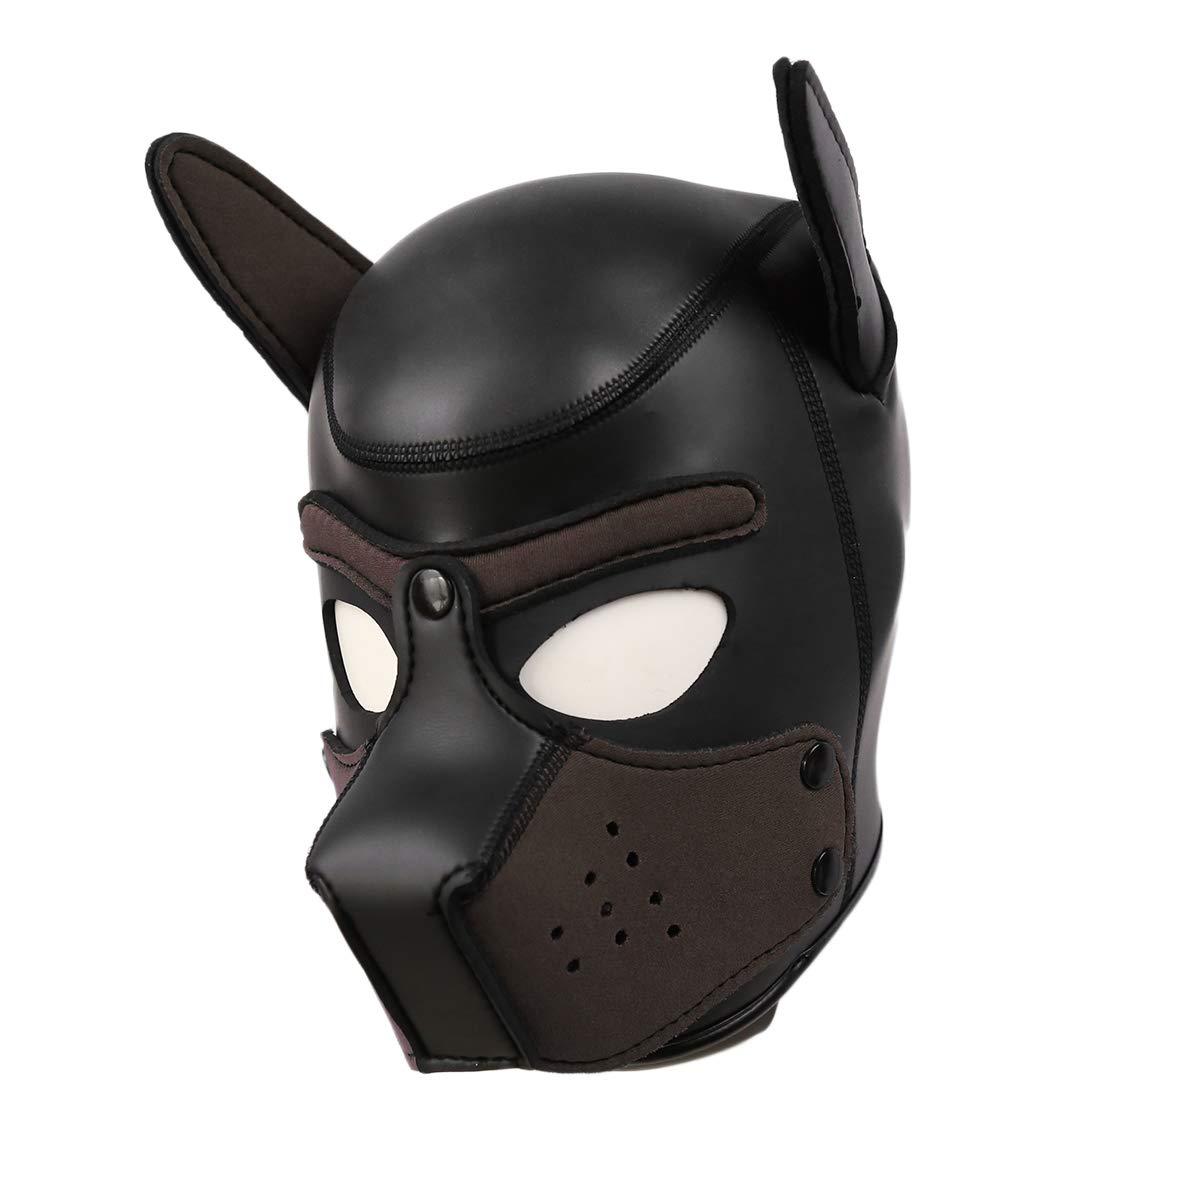 Adults Neoprene Puppy Hood Mask, Removable Cosplay Dog Full Face Pup Hood Mask